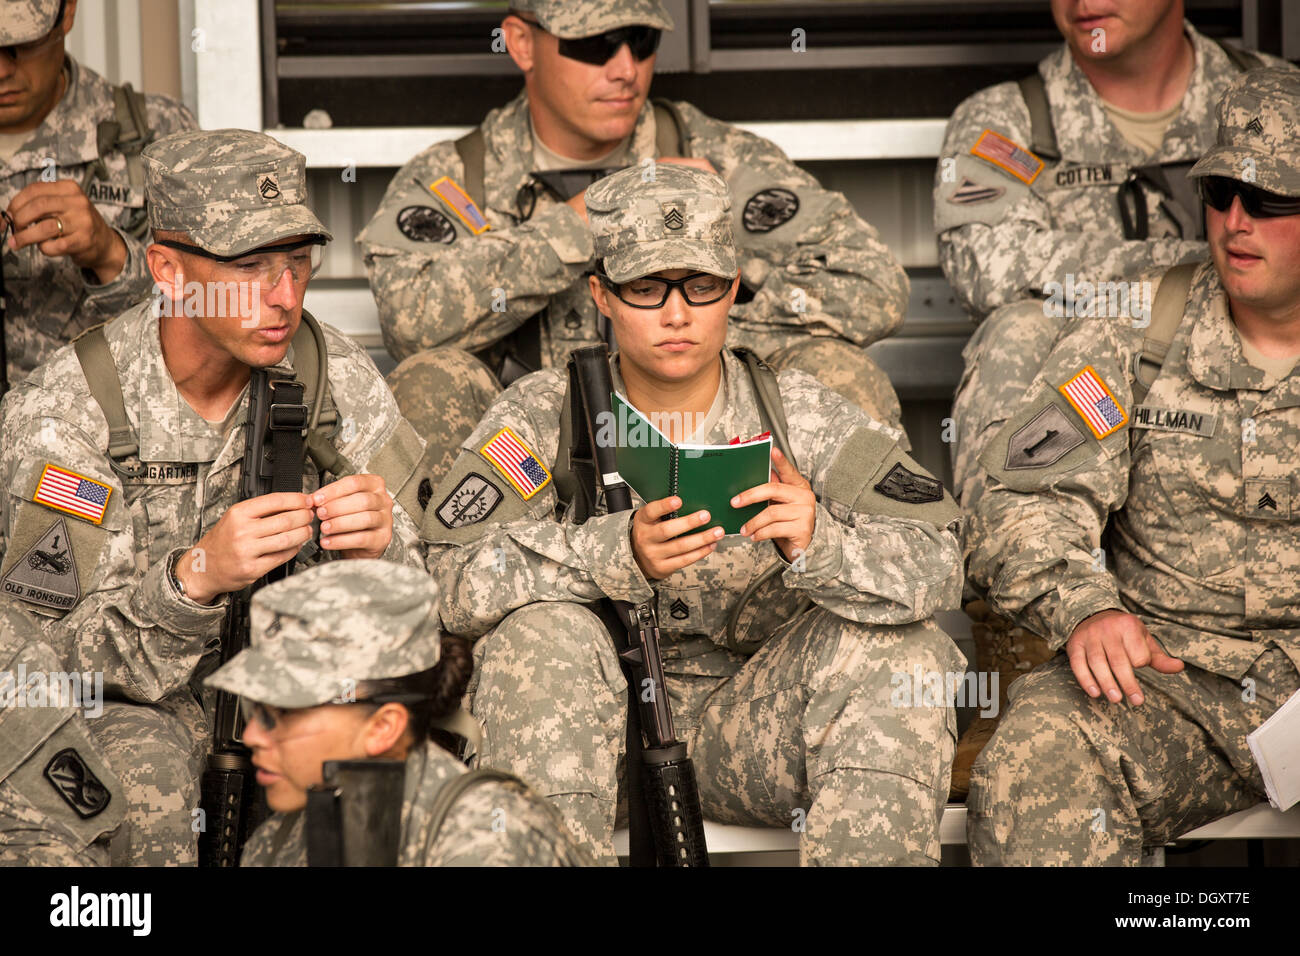 Male and female Drill Sergeant candidates at the US Army Drill Instructors School Fort Jackson study before being tested on marching drills September 26, 2013 in Columbia, SC. While 14 percent of the Army is women soldiers there is a shortage of female Drill Sergeants. Stock Photo